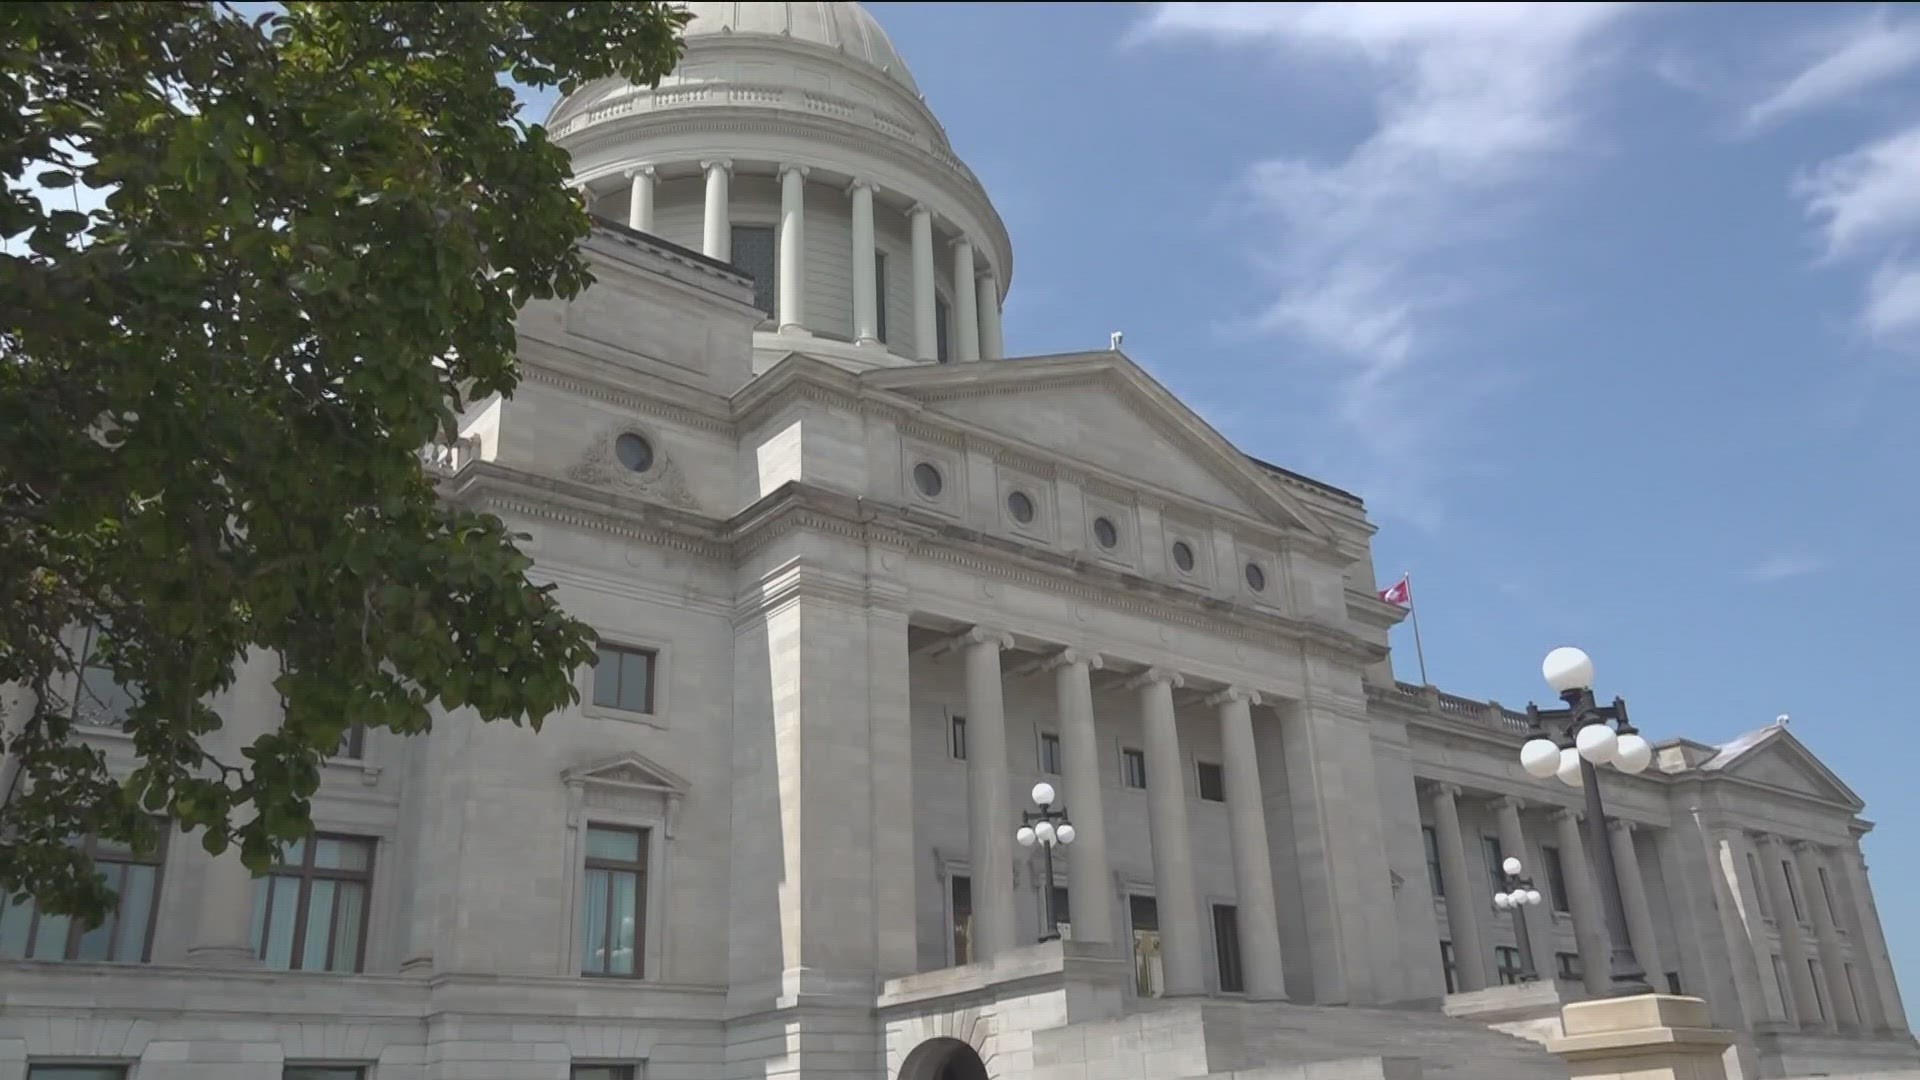 A PUSH TO AMEND ARKANSAS' FREEDOM OF INFORMATION ACT LAWS, WHICH ALLOW YOU TO REQUEST GOVERNMENT RECORDS, CAN NOW MOVE FORWARD.